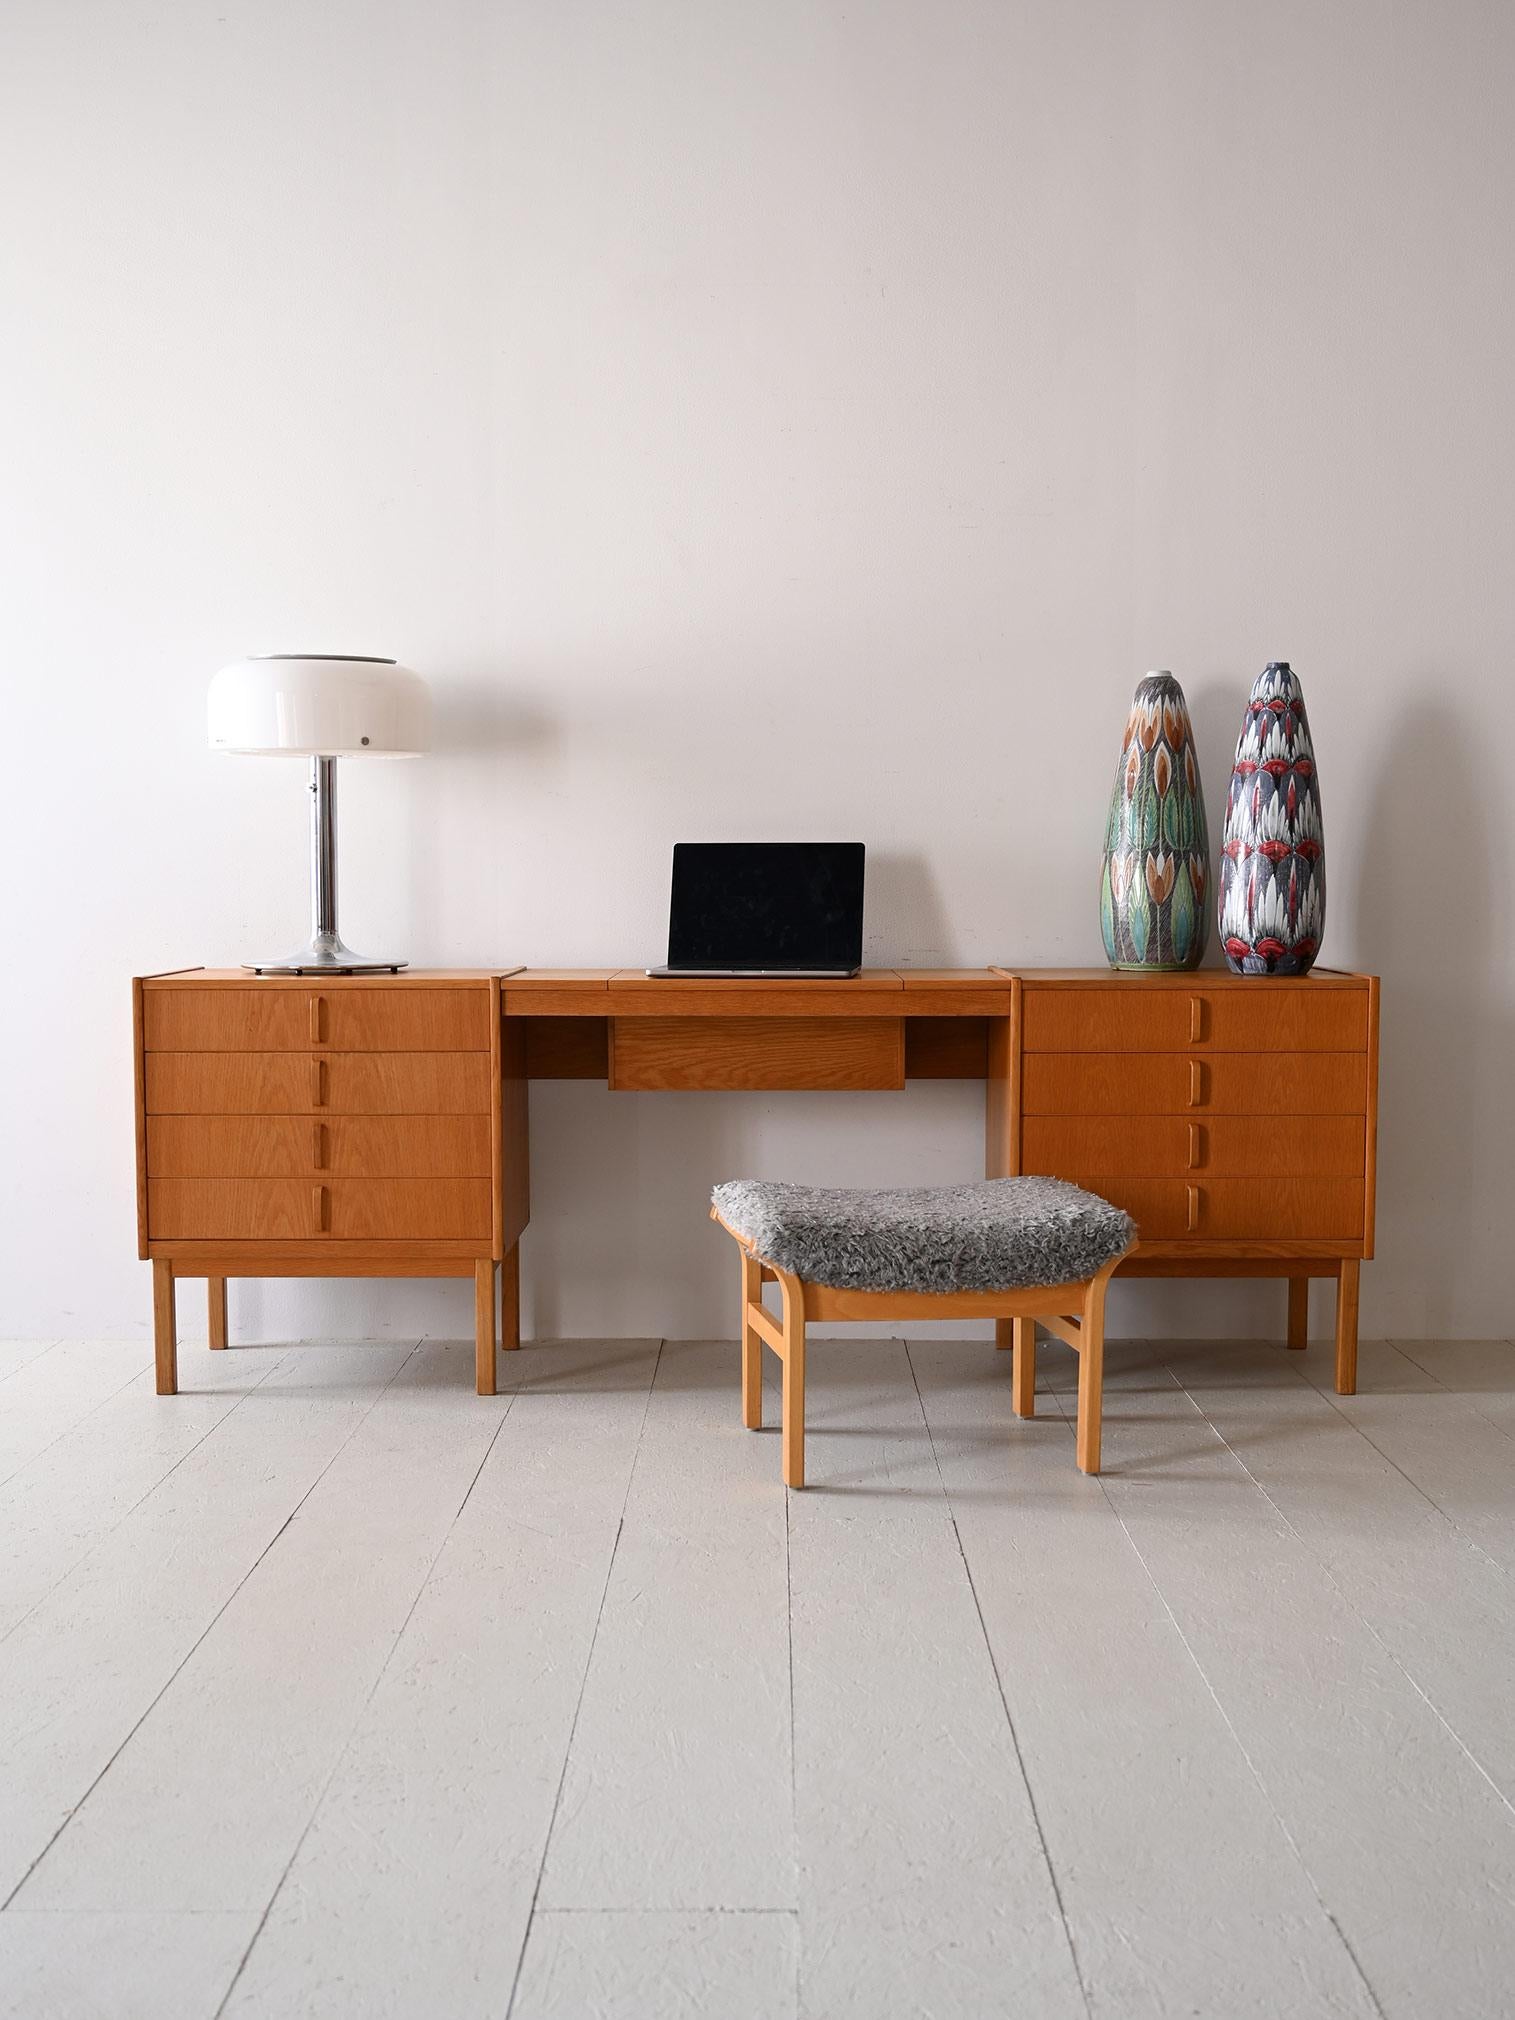 This 1960s Scandinavian desk made of oak wood consists of two drawers and a central desk. 
The distinguishing feature is a hidden mirror that, when raised, transforms the cabinet into a dressing table, offering dual functionality. 
The two side